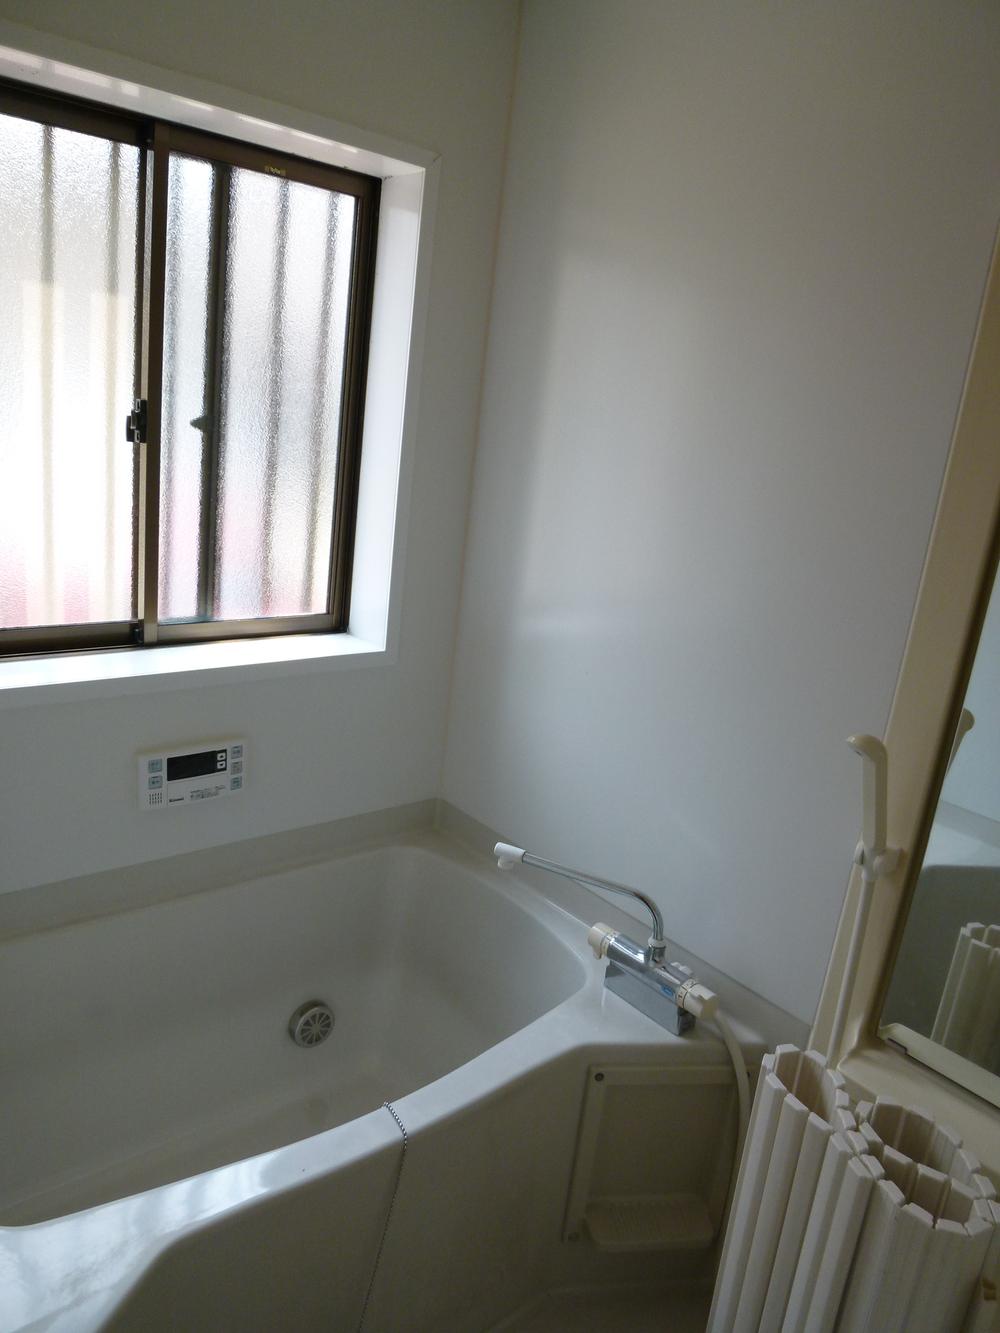 Bathroom. It is the bath of the start of bright sunlight from the window.